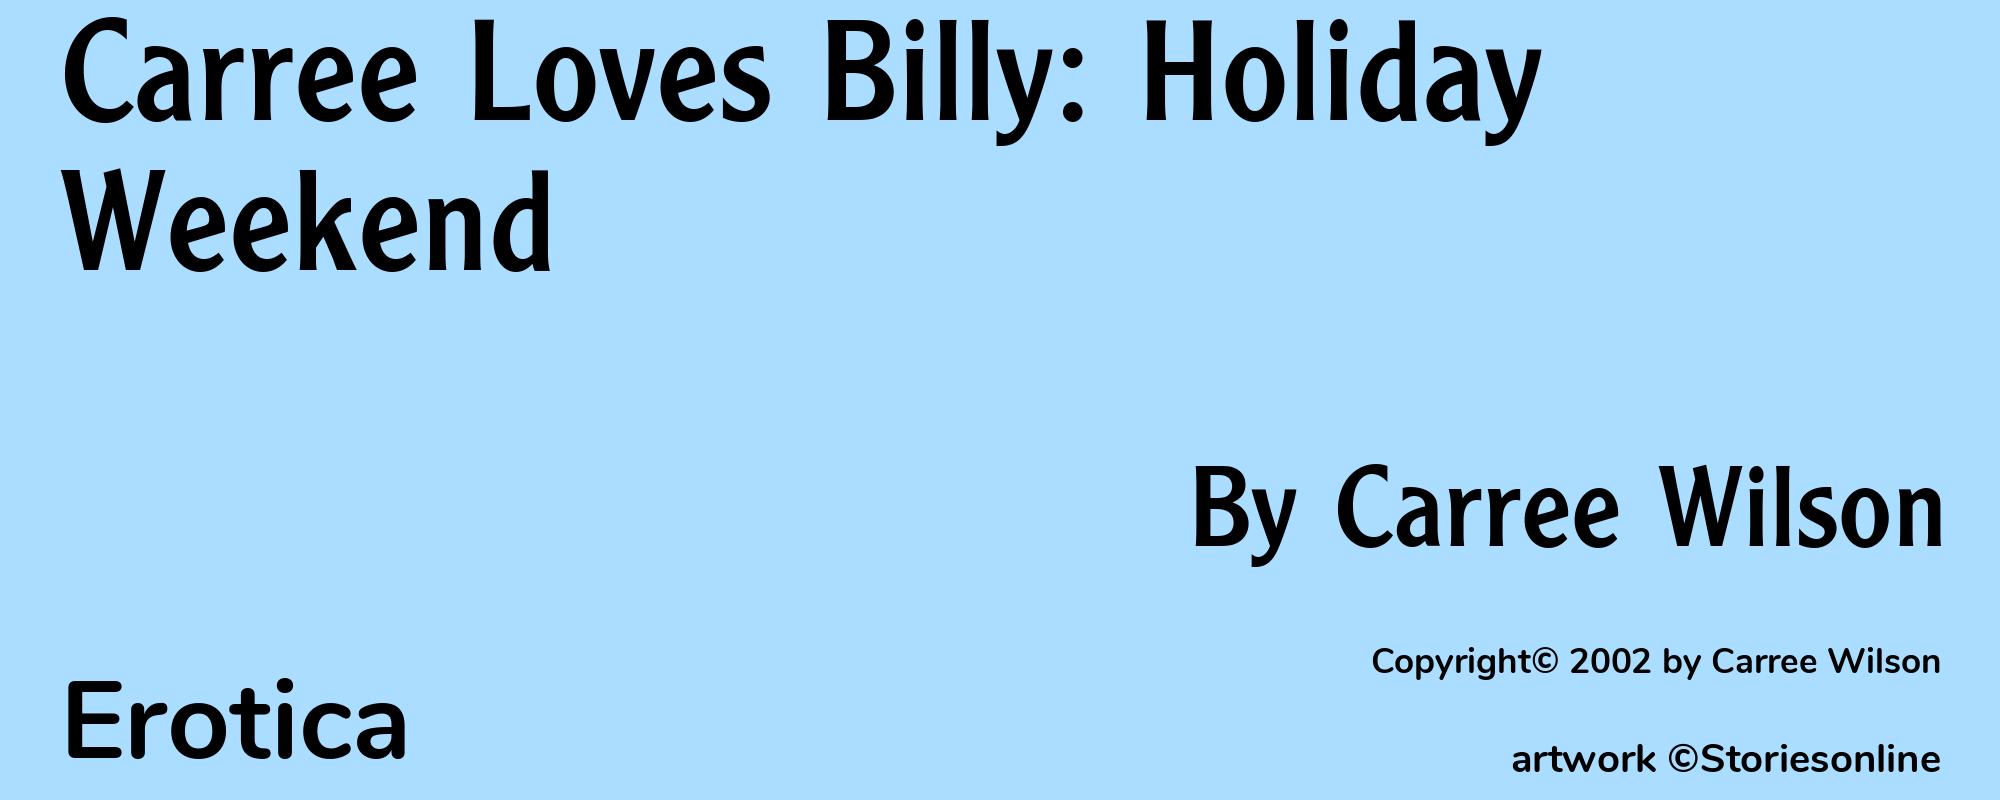 Carree Loves Billy: Holiday Weekend - Cover